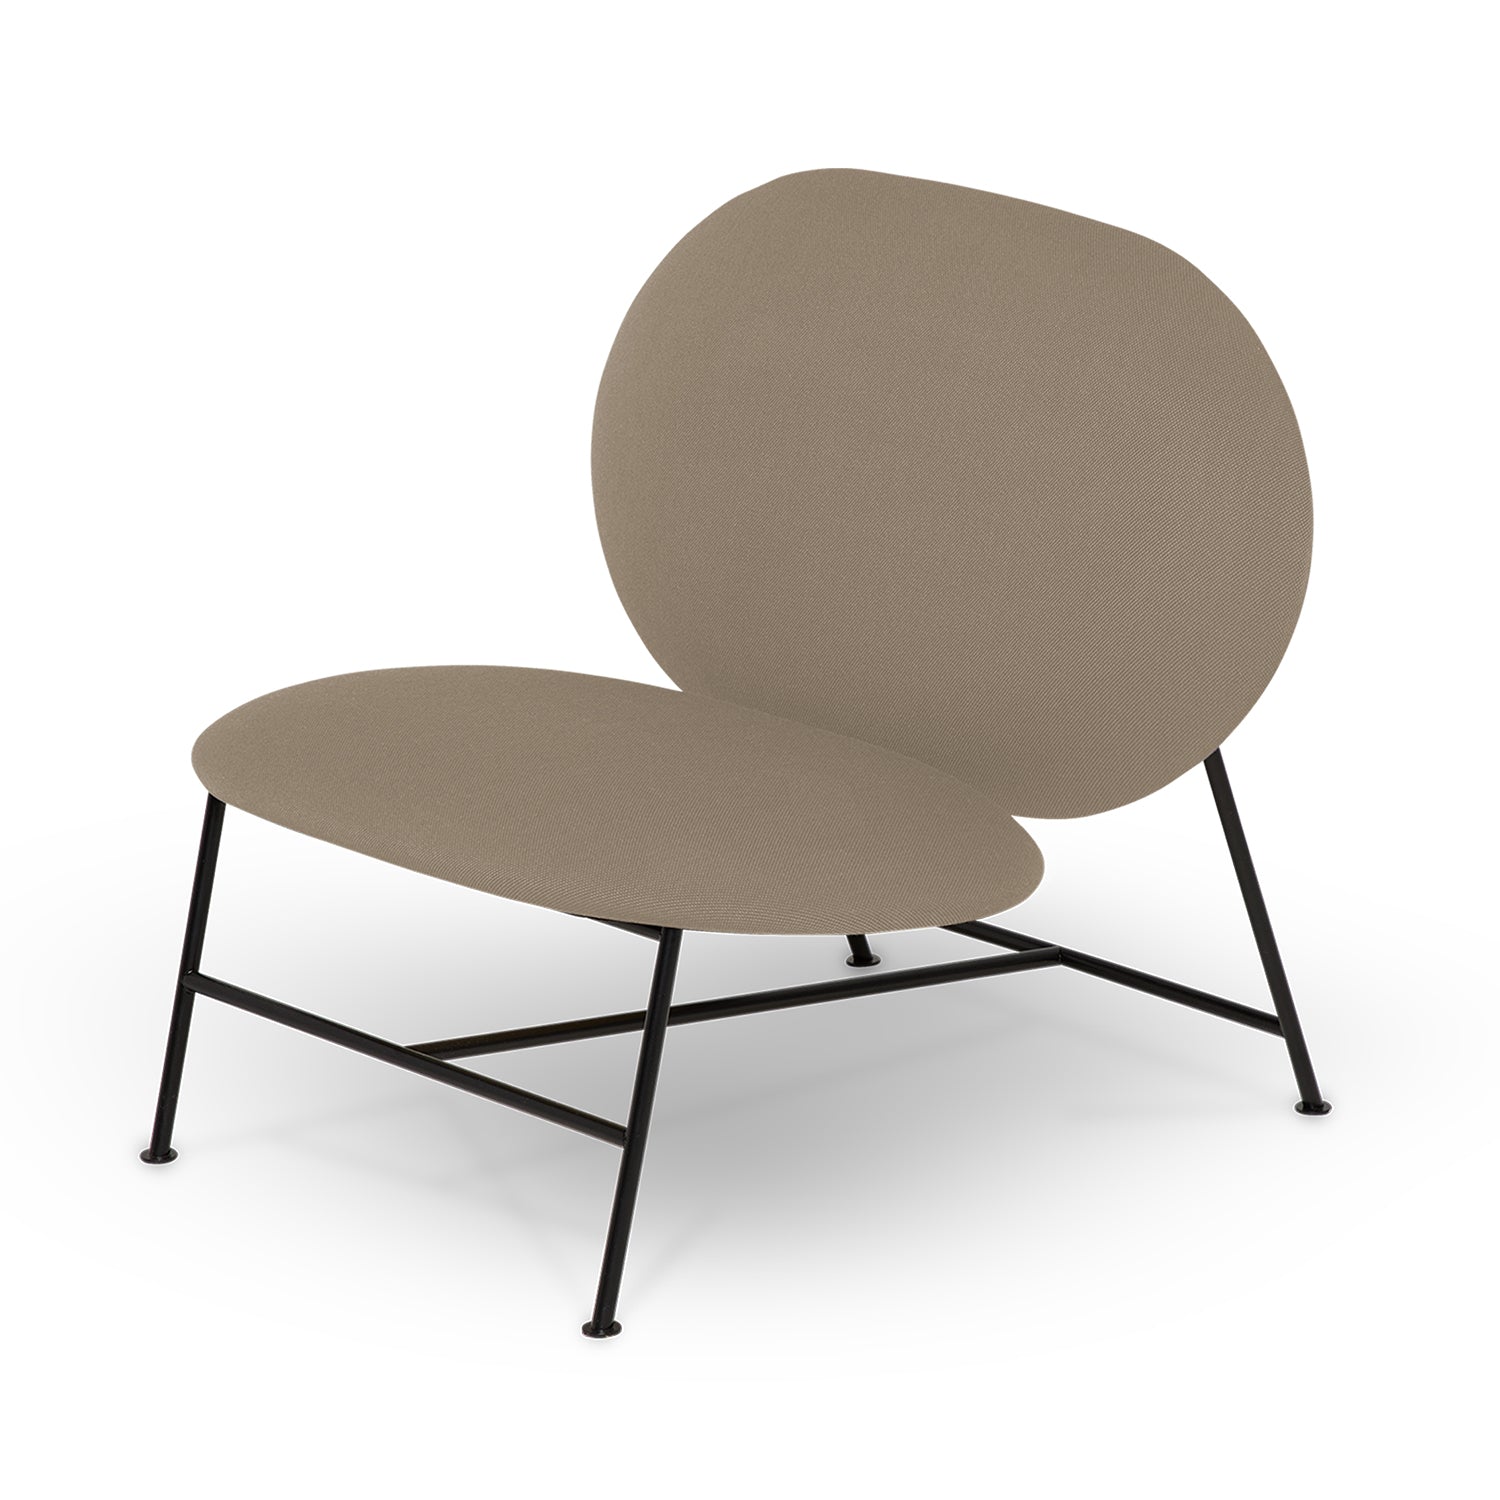 Northern Oblong Lounge Chair in Light Brown